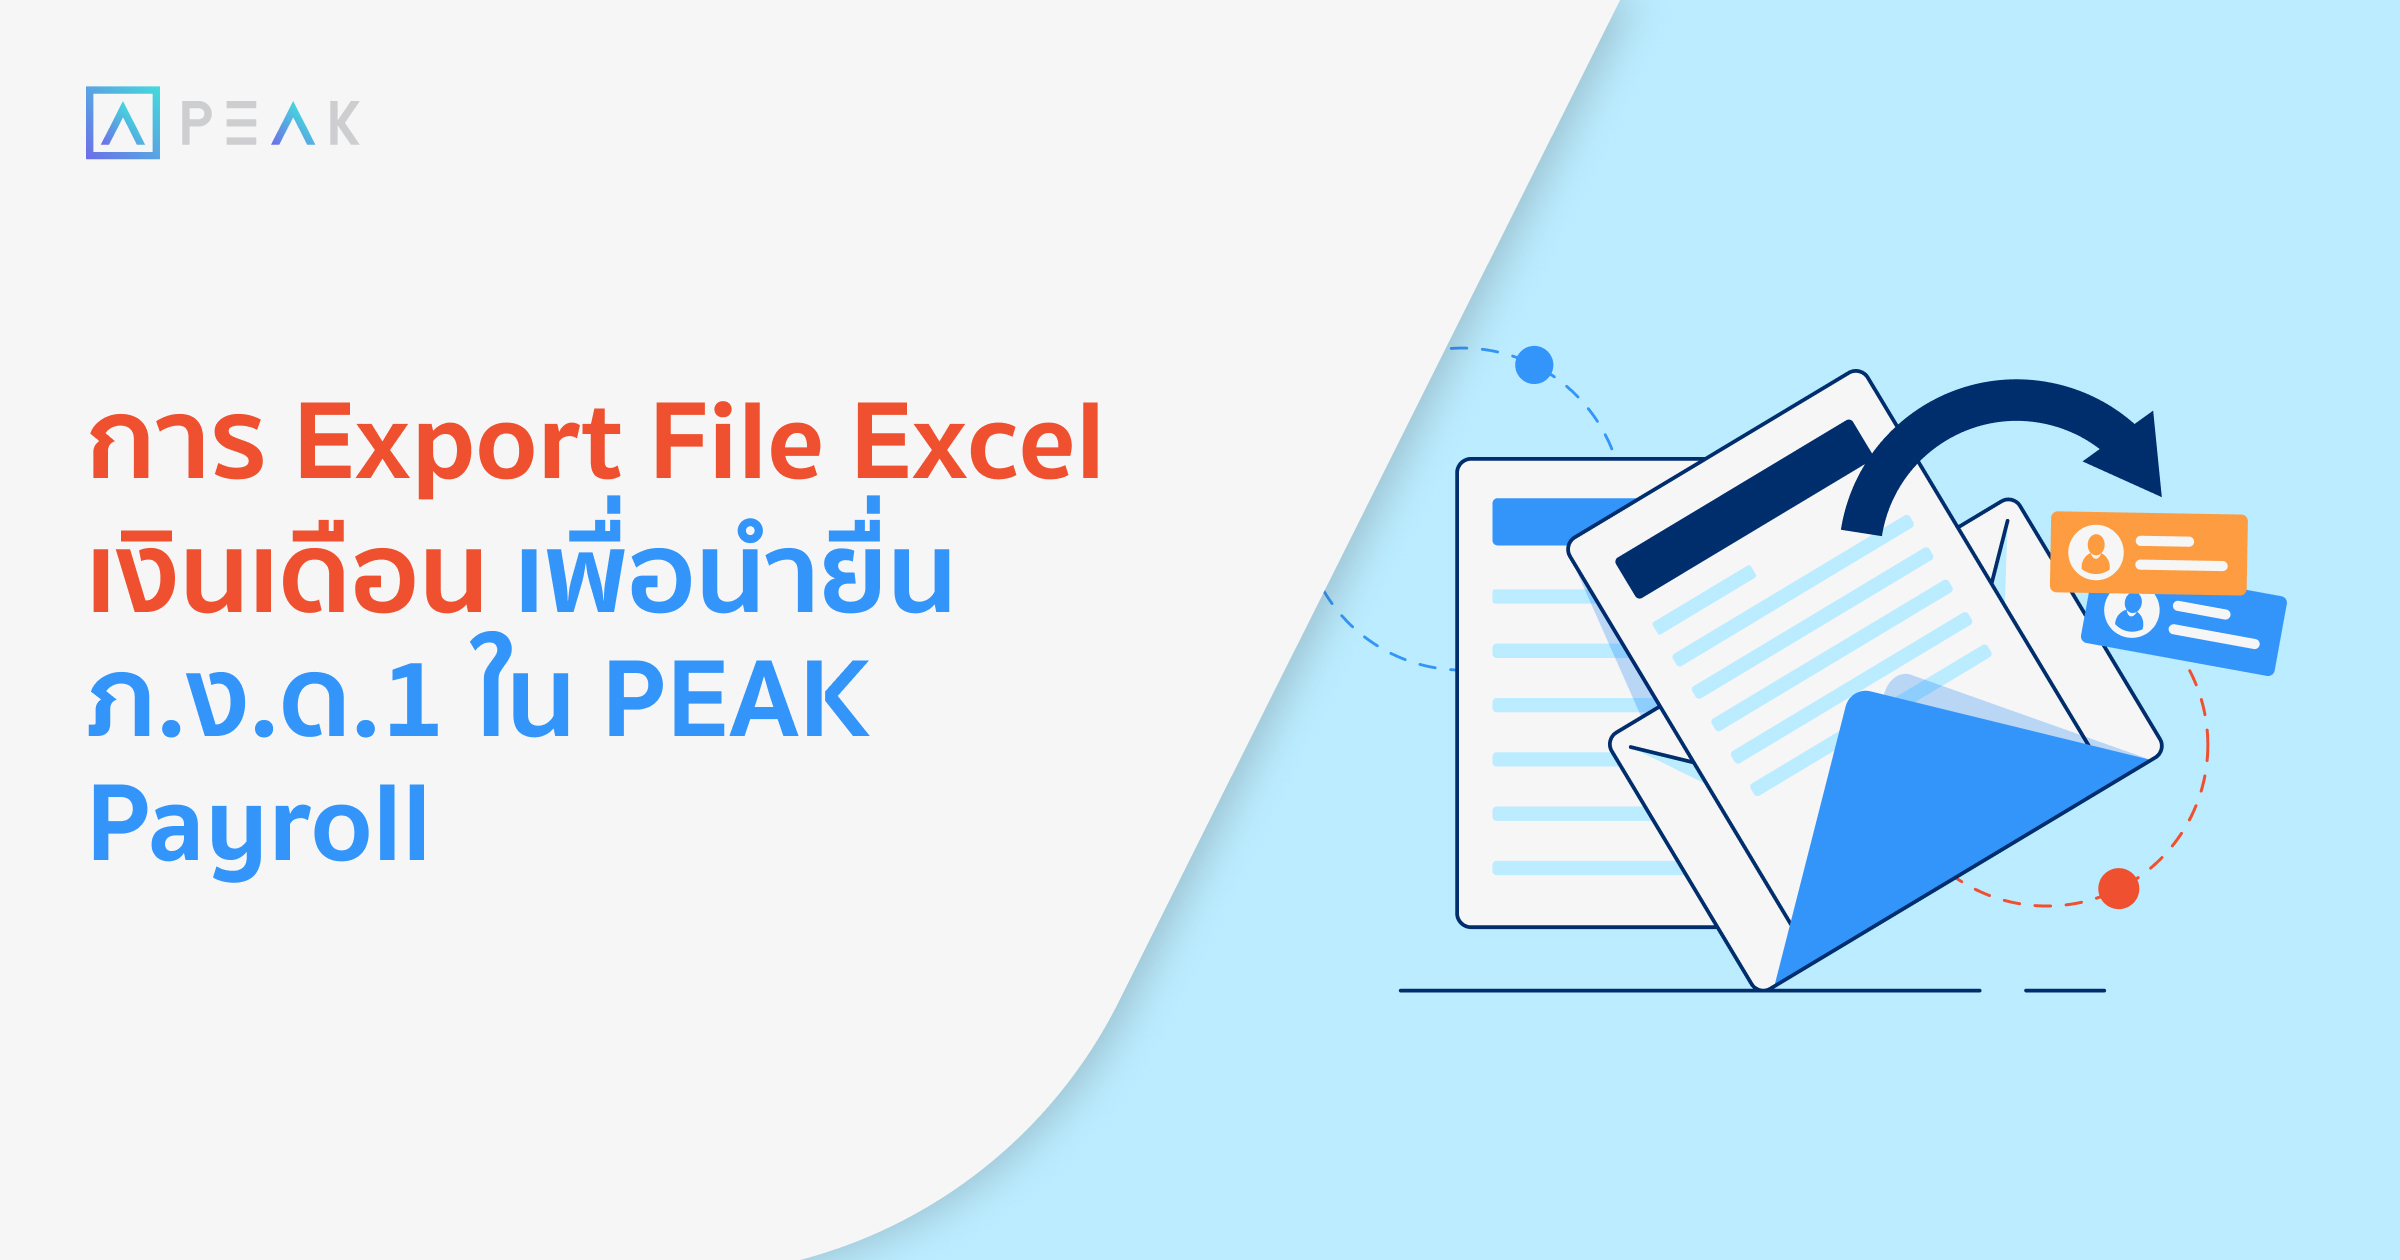 howto-export-excel-files-peakpayroll-PND1